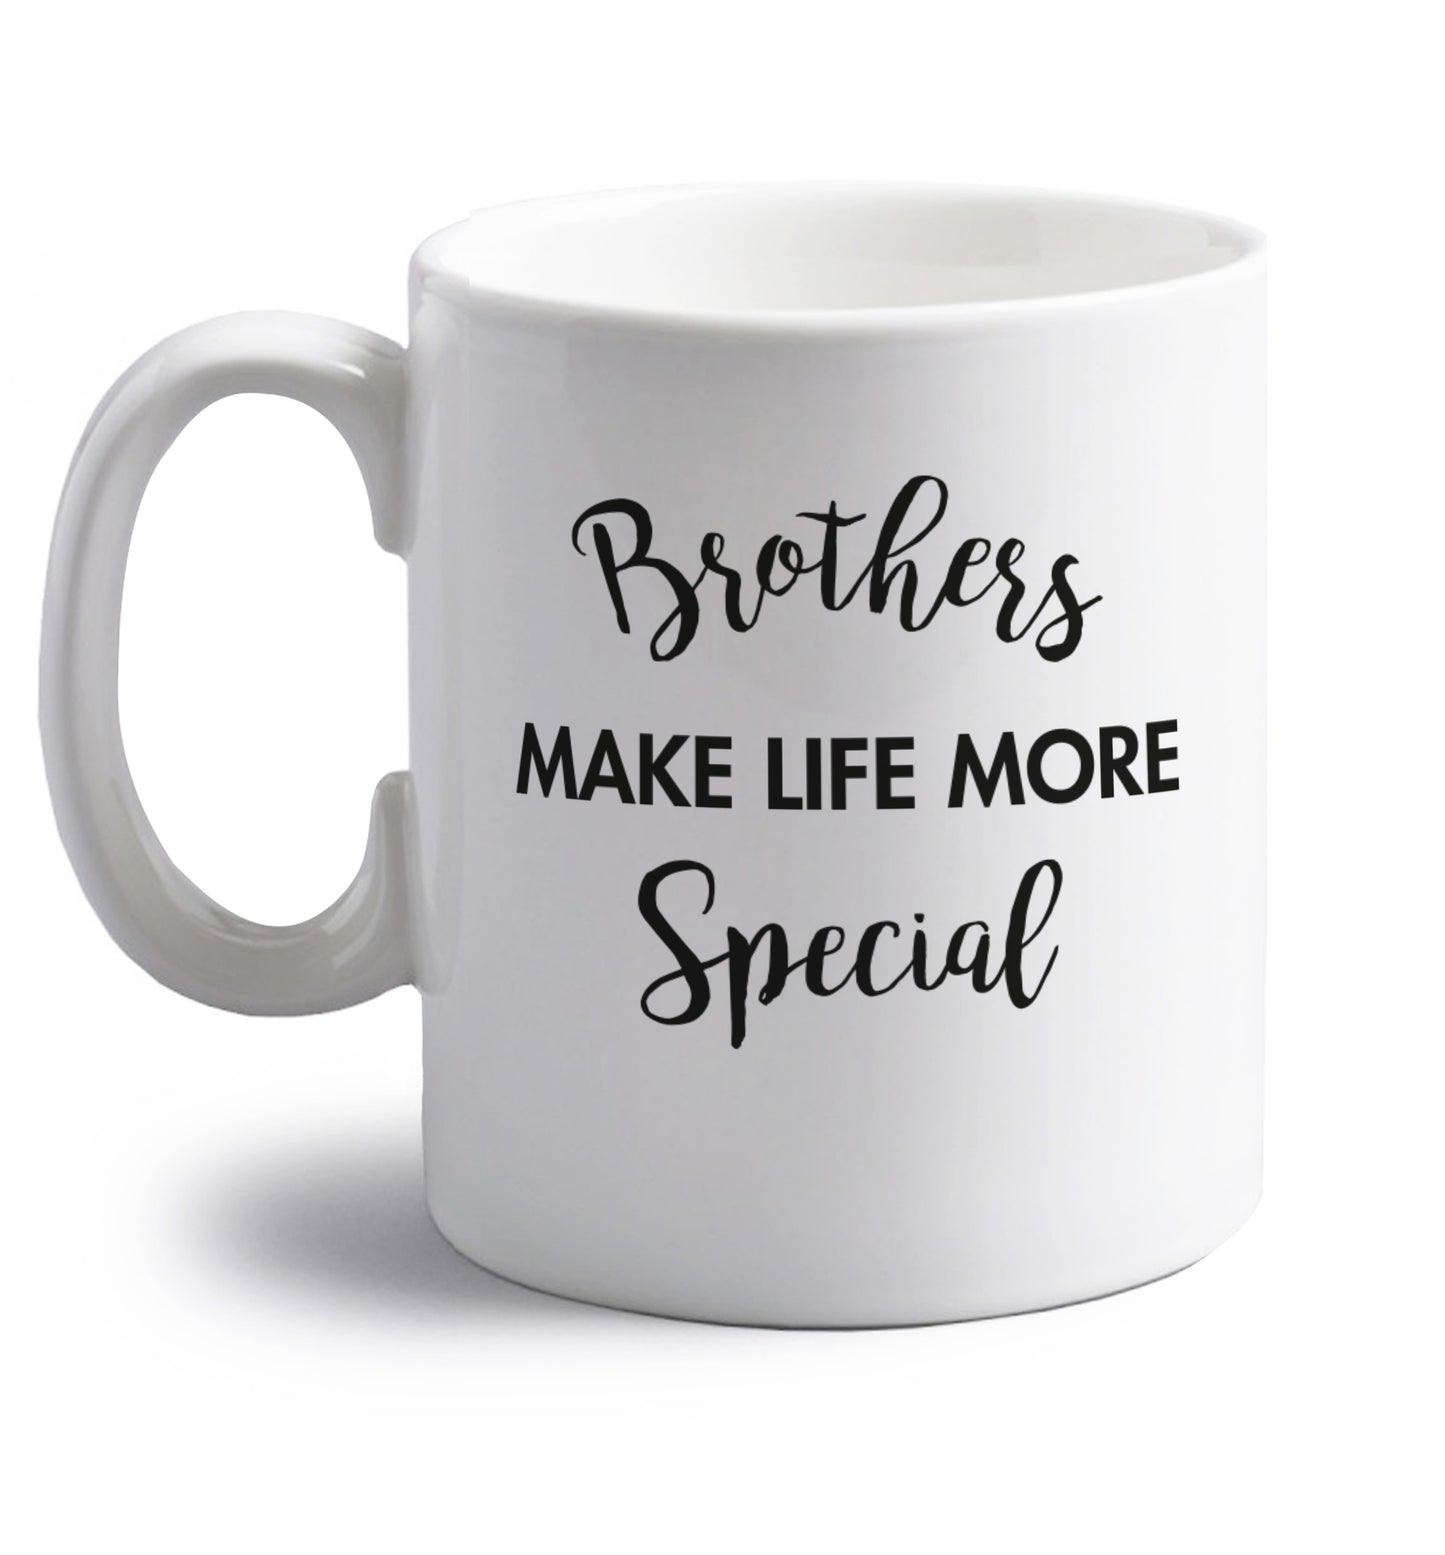 Brothers make life more special right handed white ceramic mug 